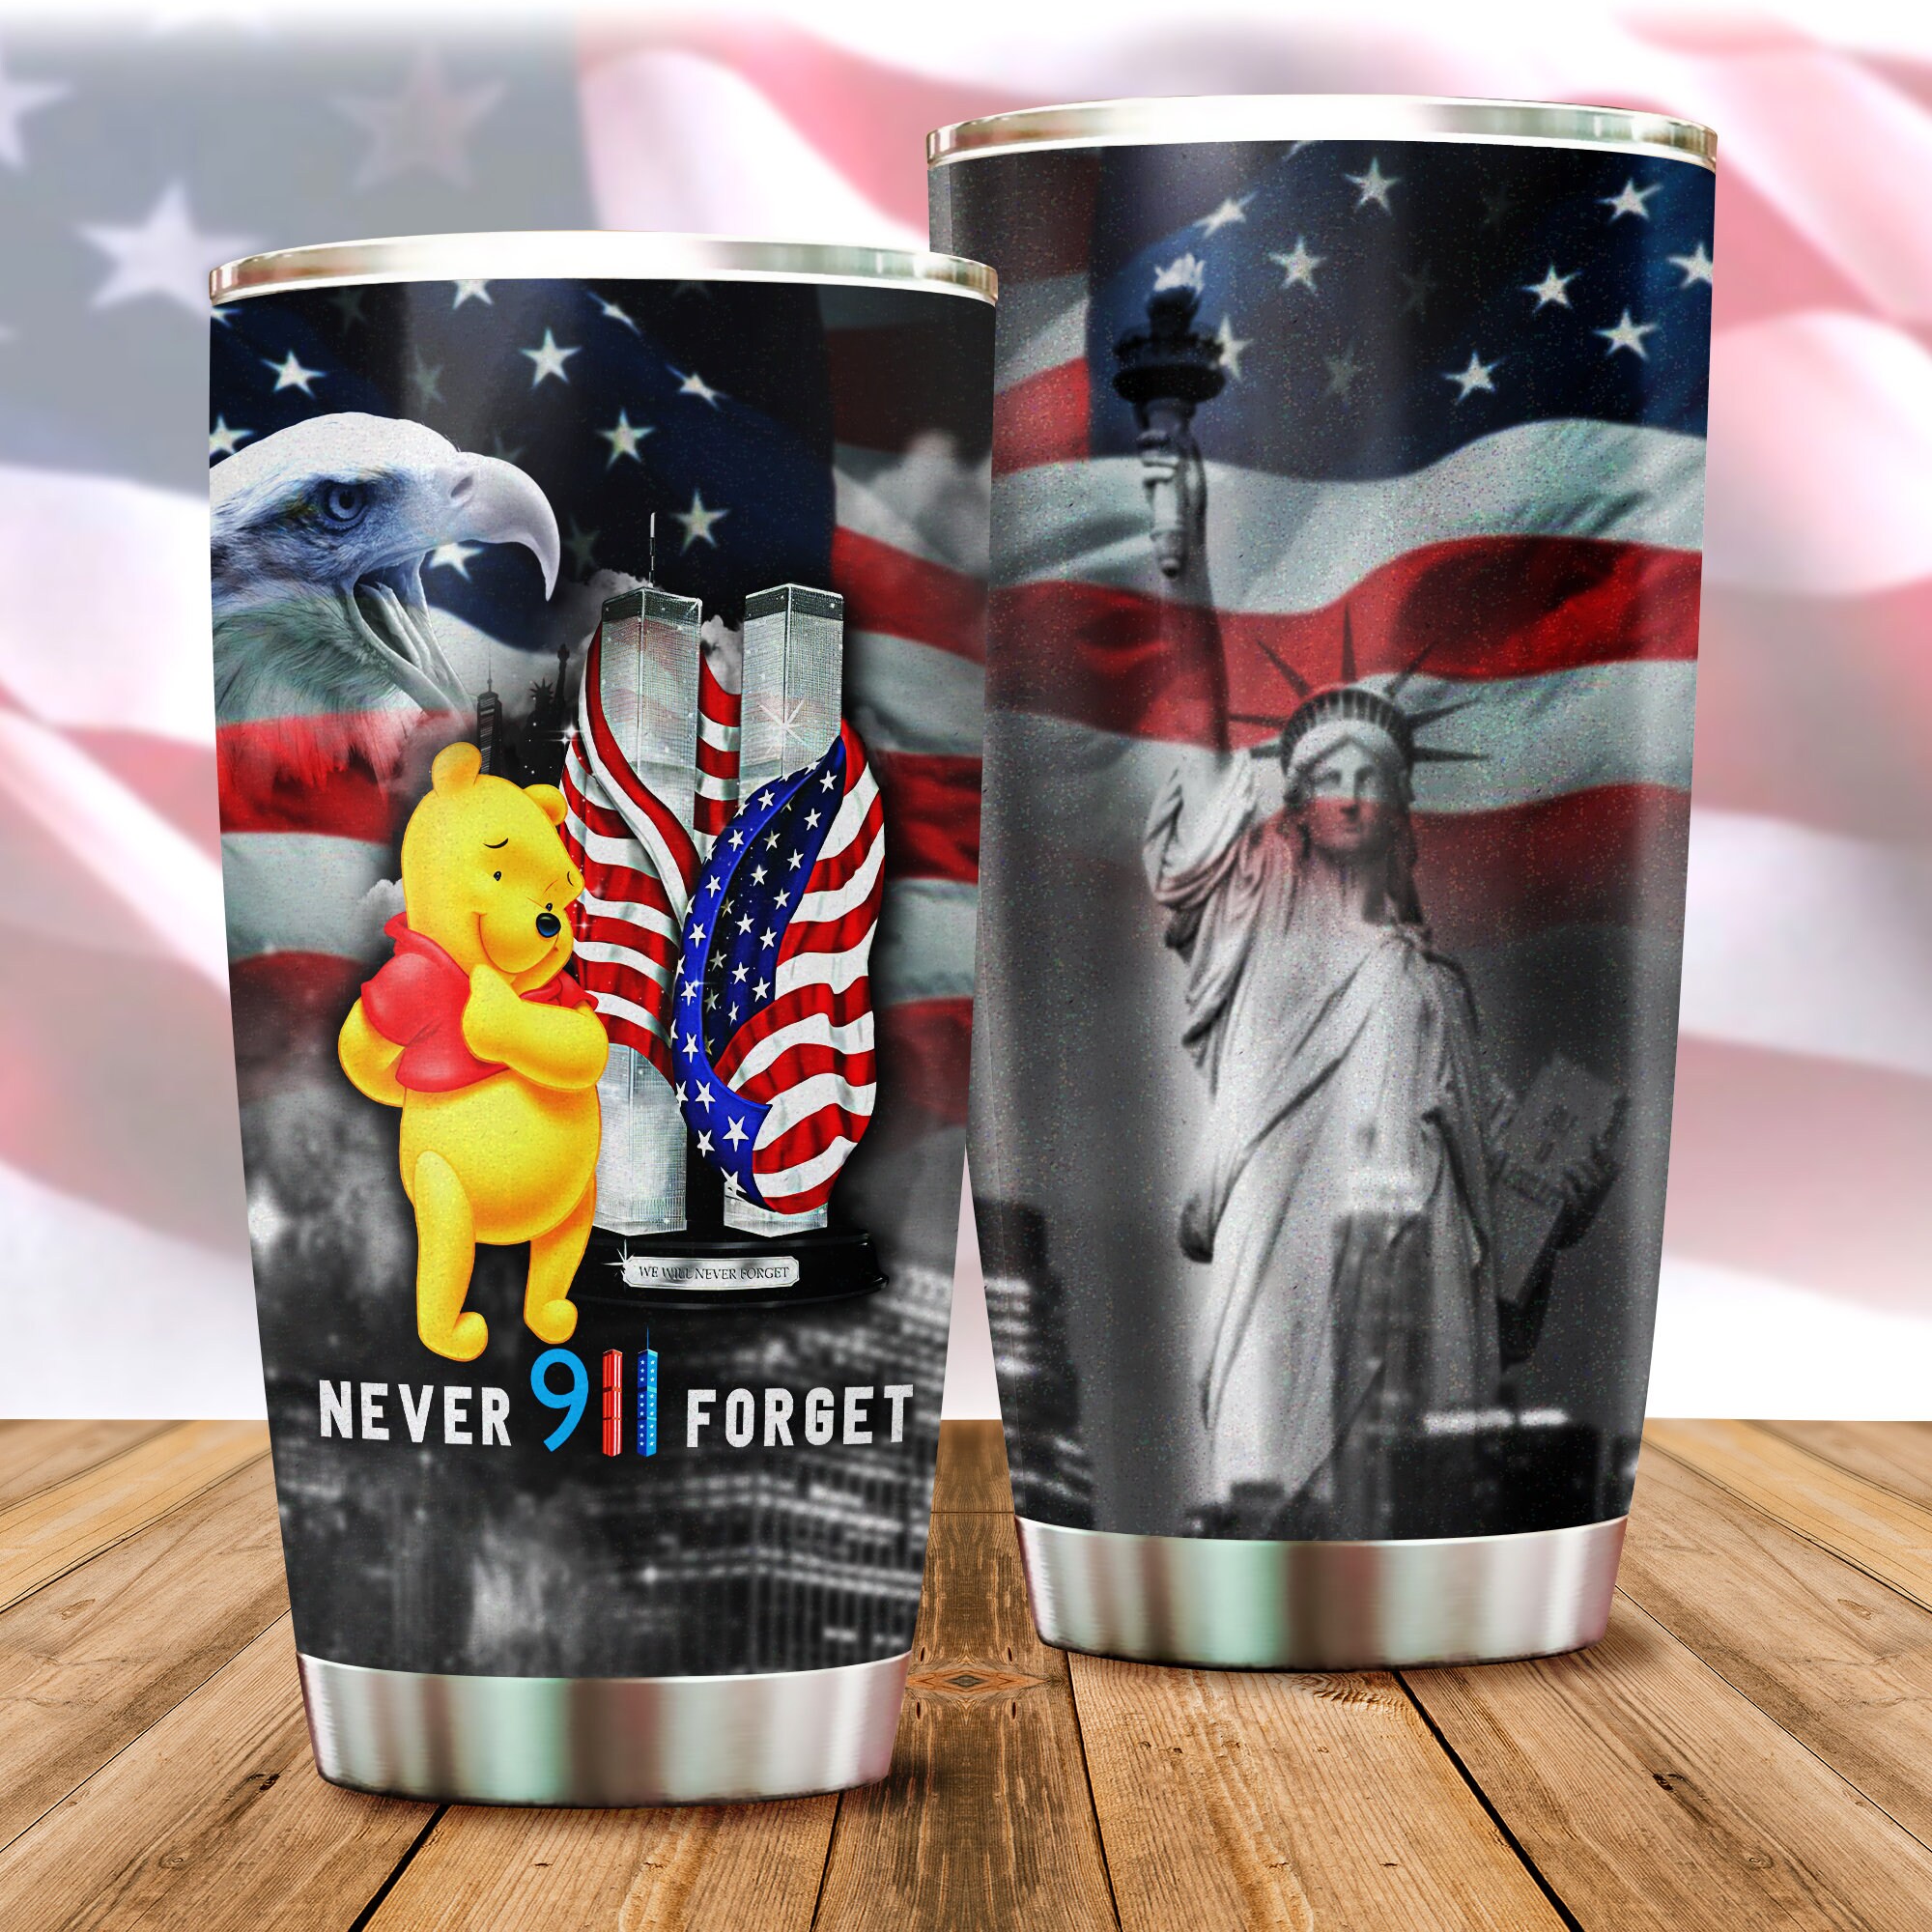 Pooh Bear US Flag Never Forget 911 Disney Graphic Cartoon Stainless Steel Tumbler